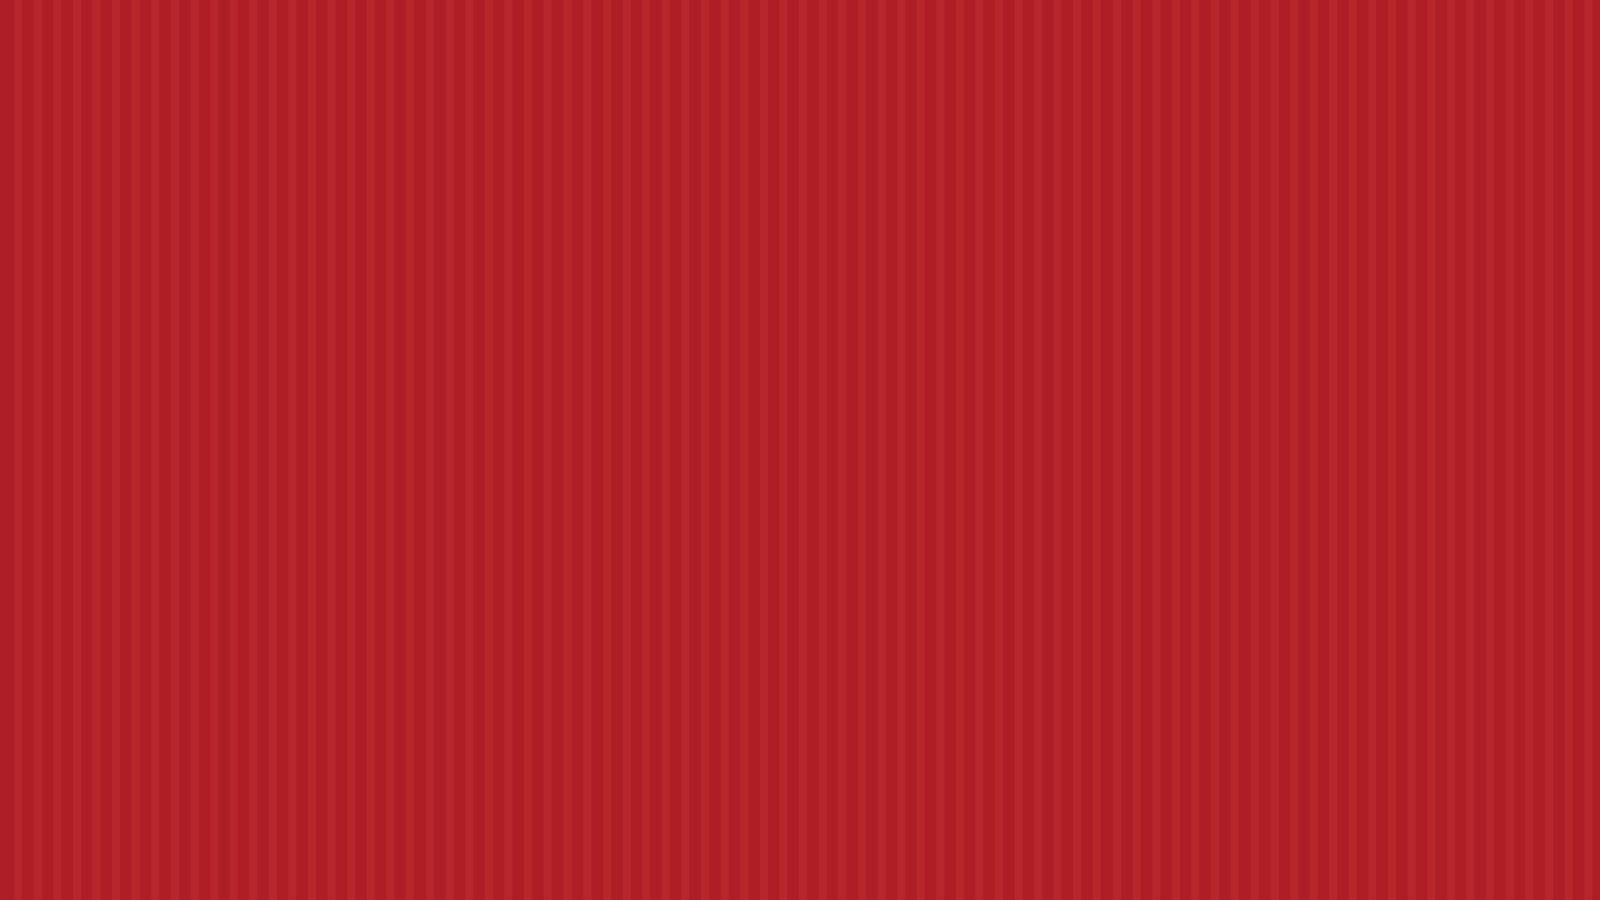 Solid Red Background Wallpaper HD